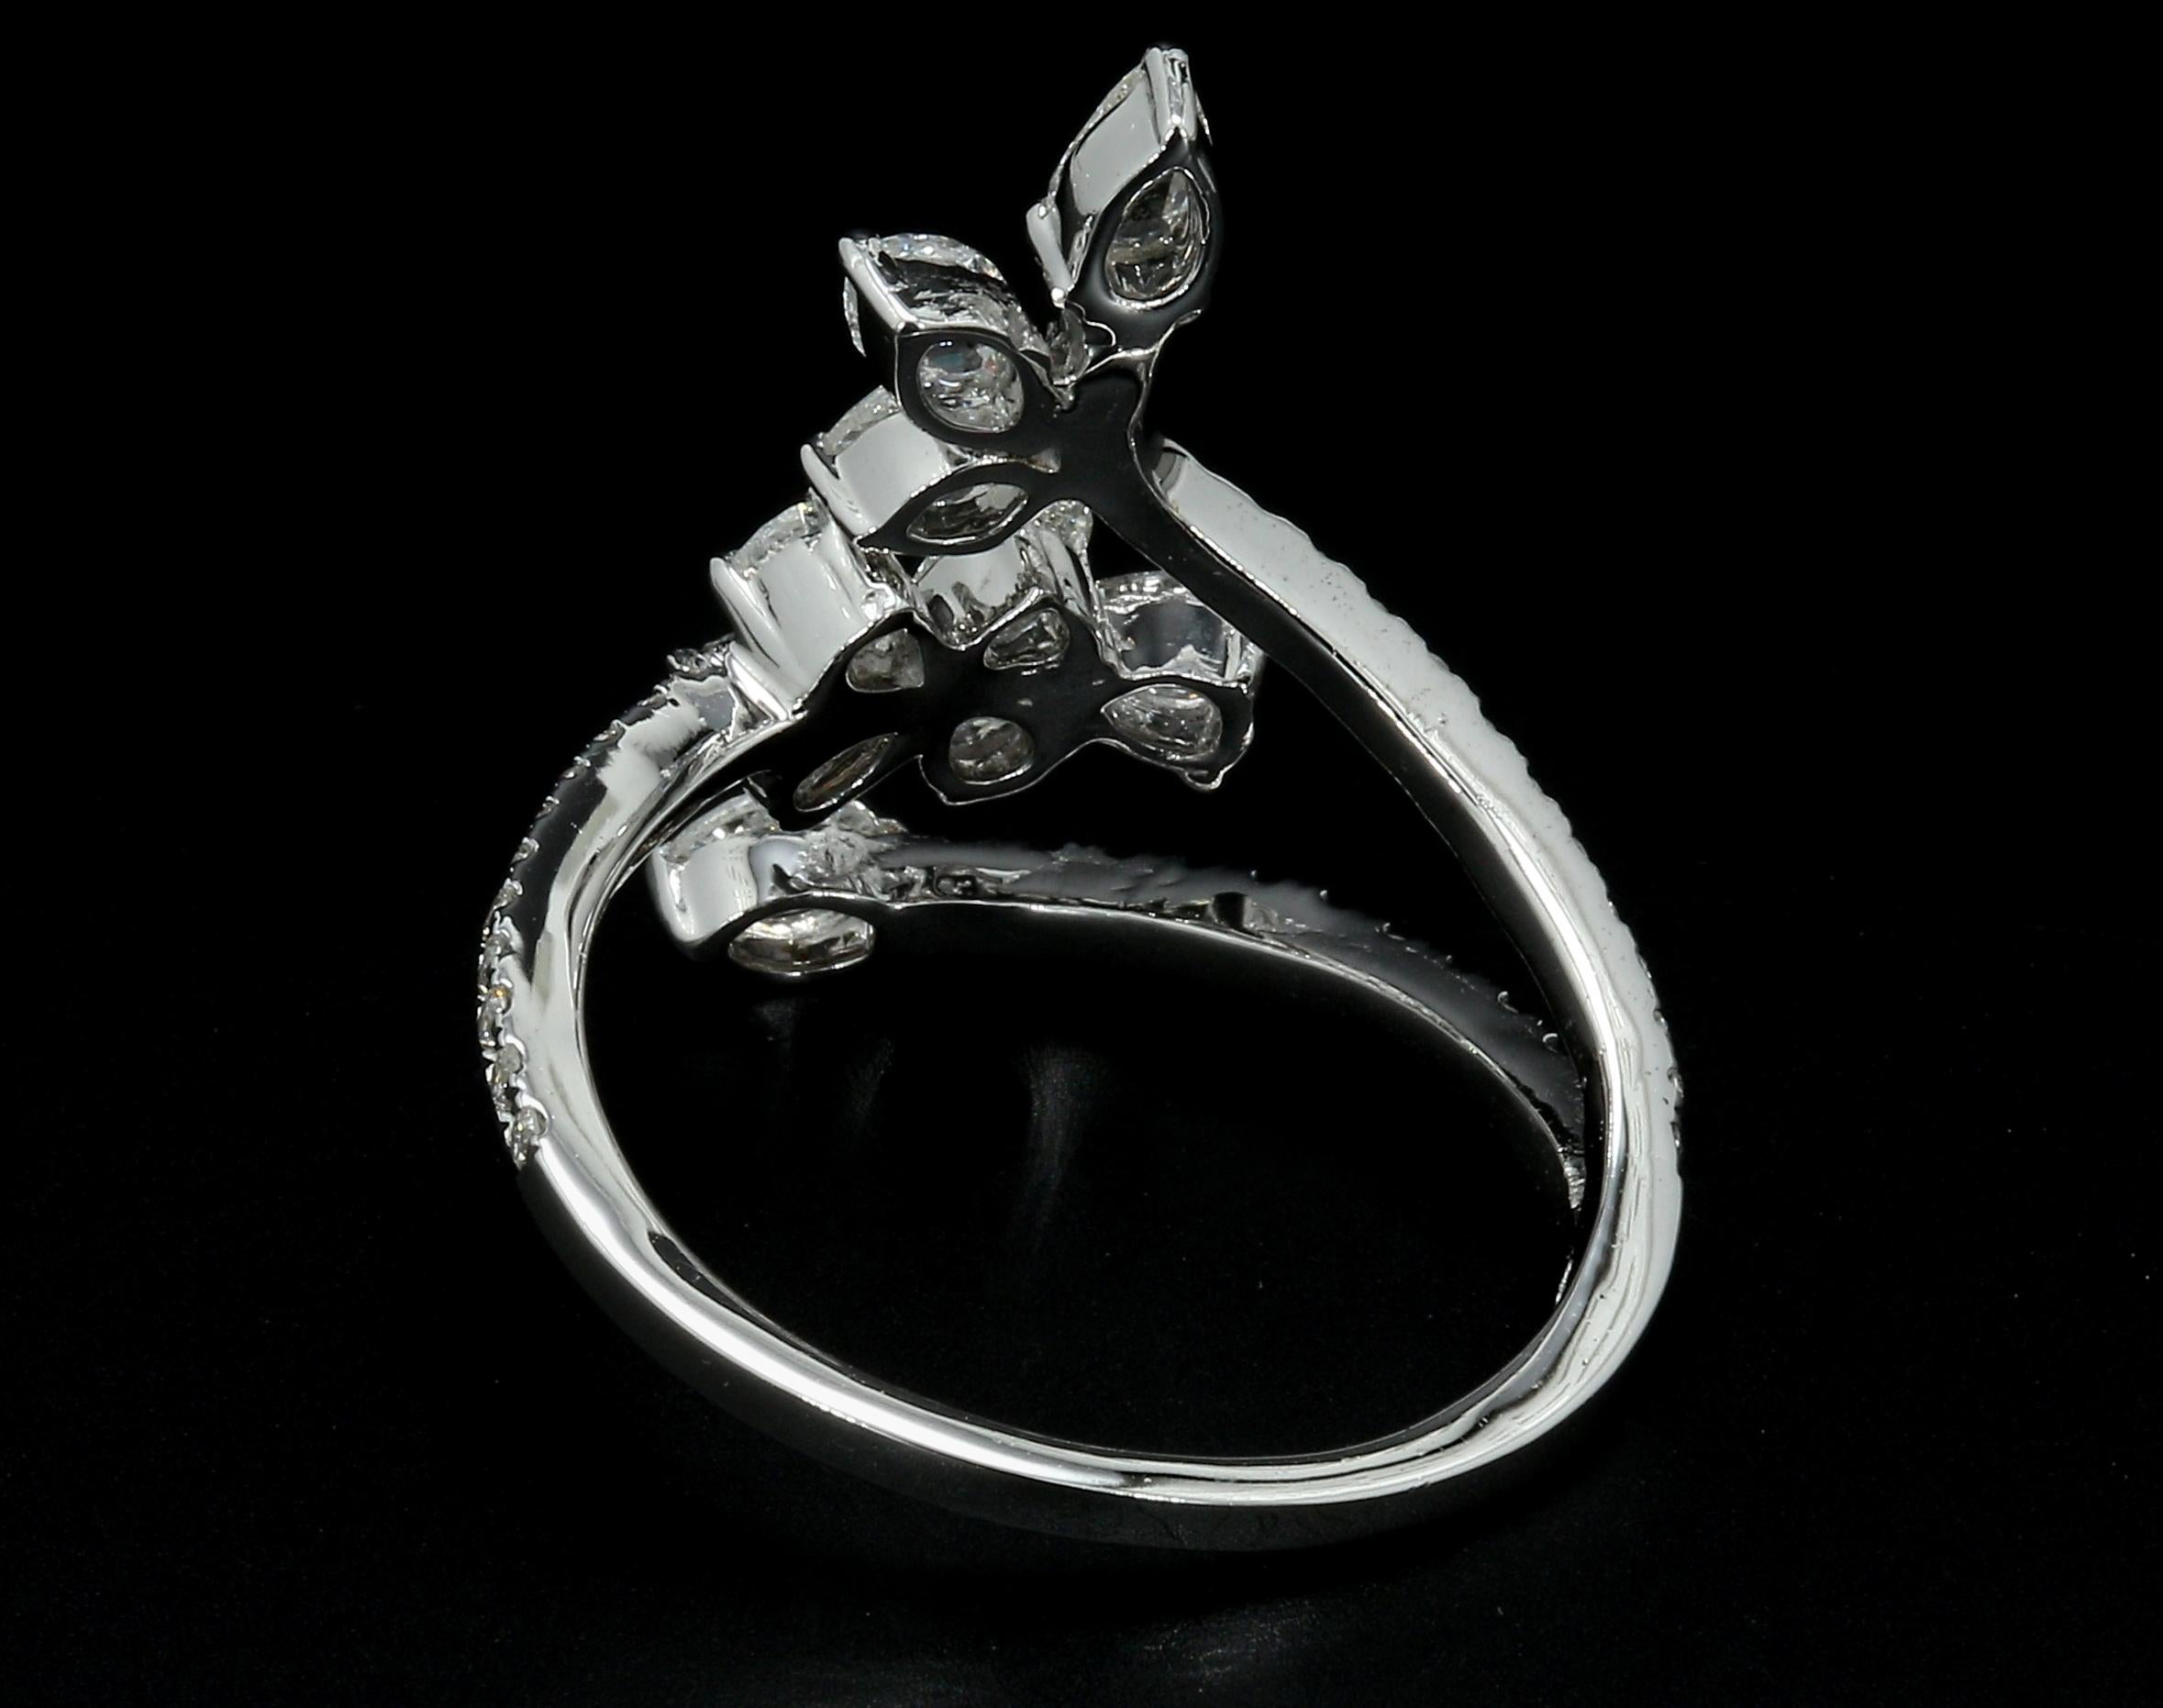 PANIM 0.91 Carat Ring with Diamond Rosecut in 18 Karat White Gold In New Condition For Sale In Tsim Sha Tsui, Hong Kong